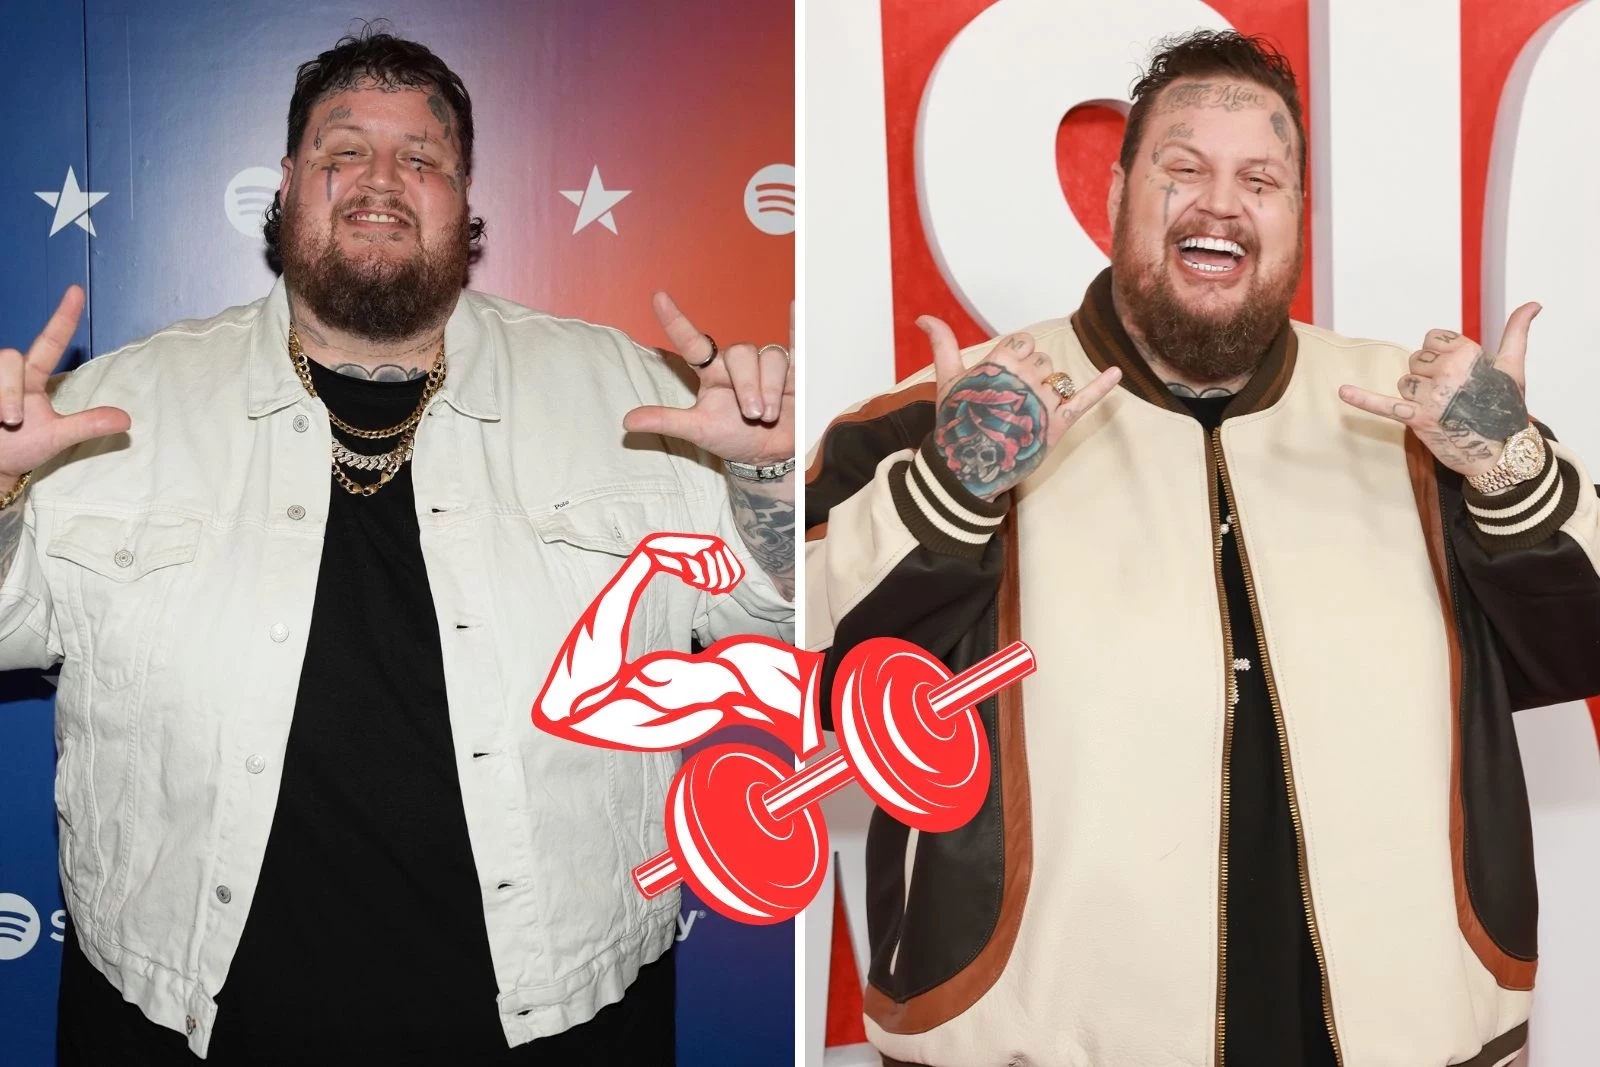 Jelly Roll Weight Loss Update: ‘I Feel Really Good’